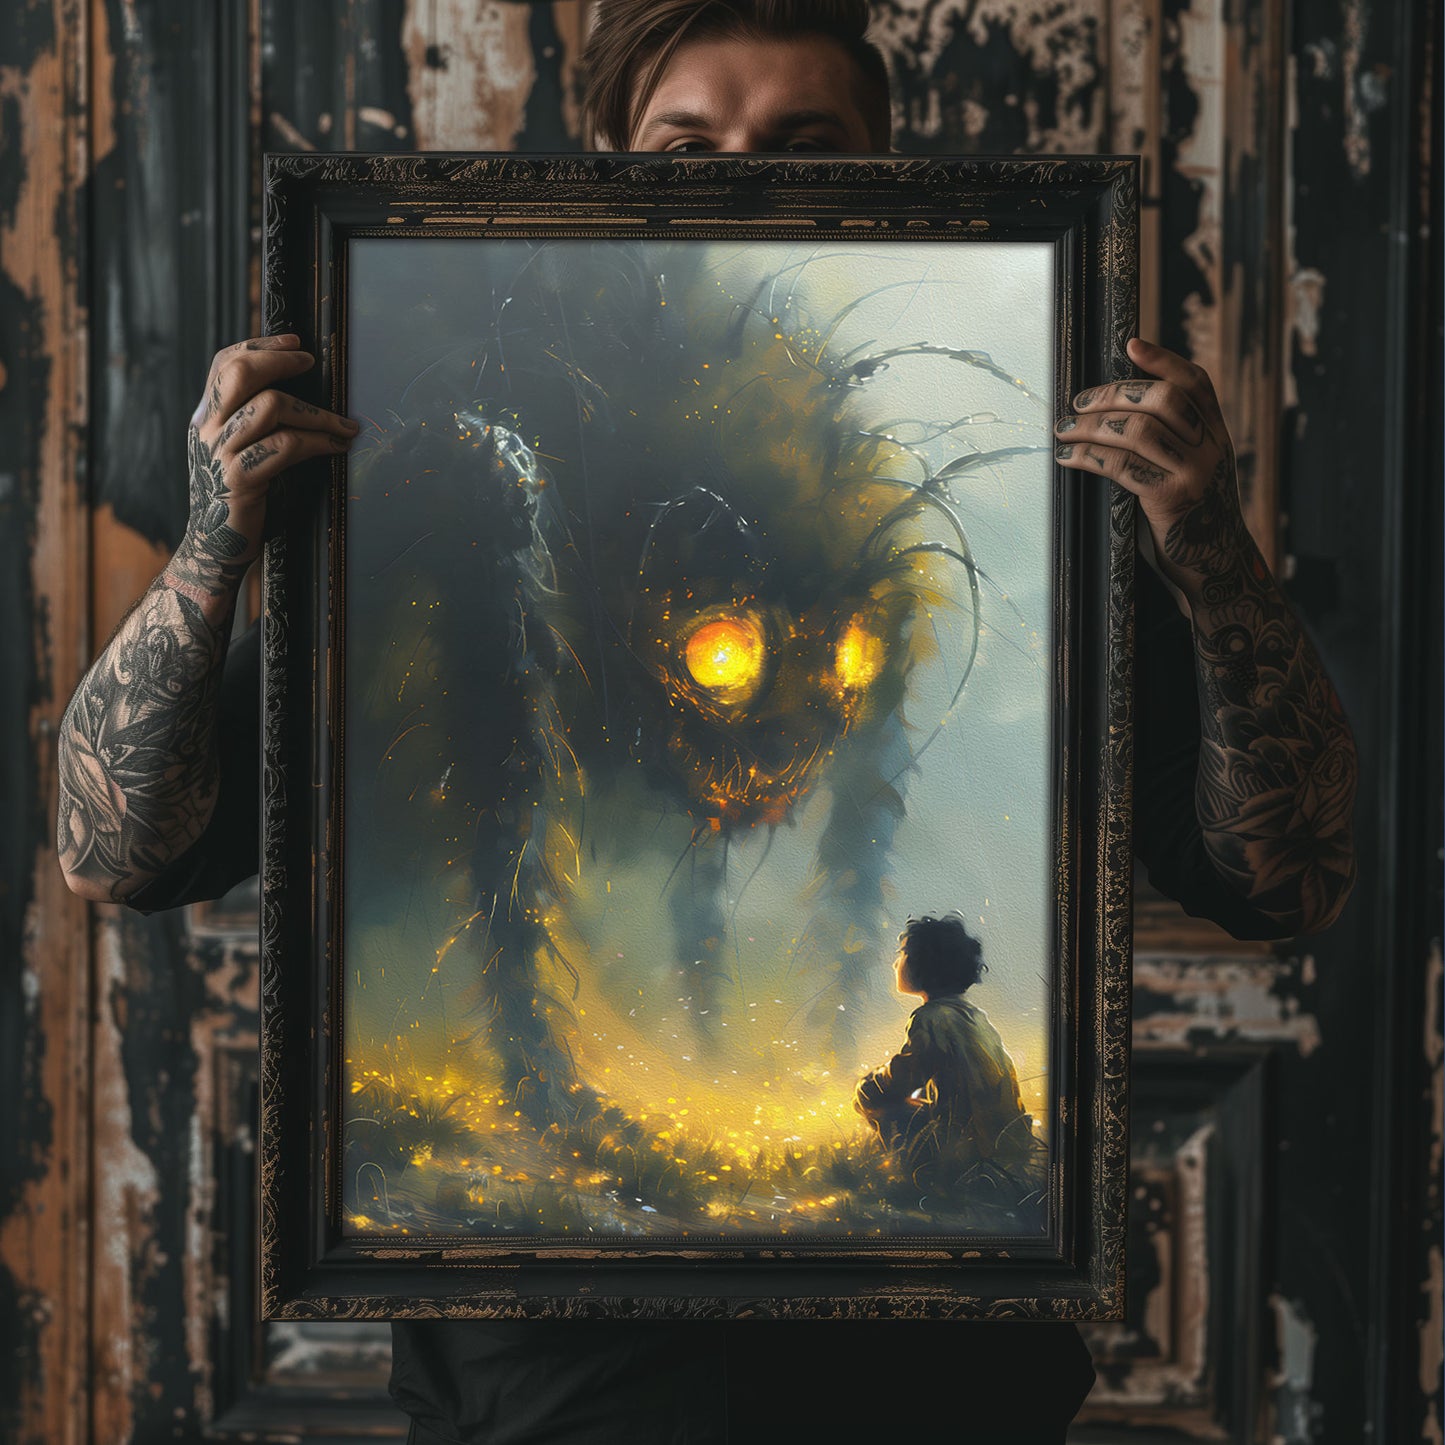 Poster Wall Art featuring a Boy and a Huge Spider